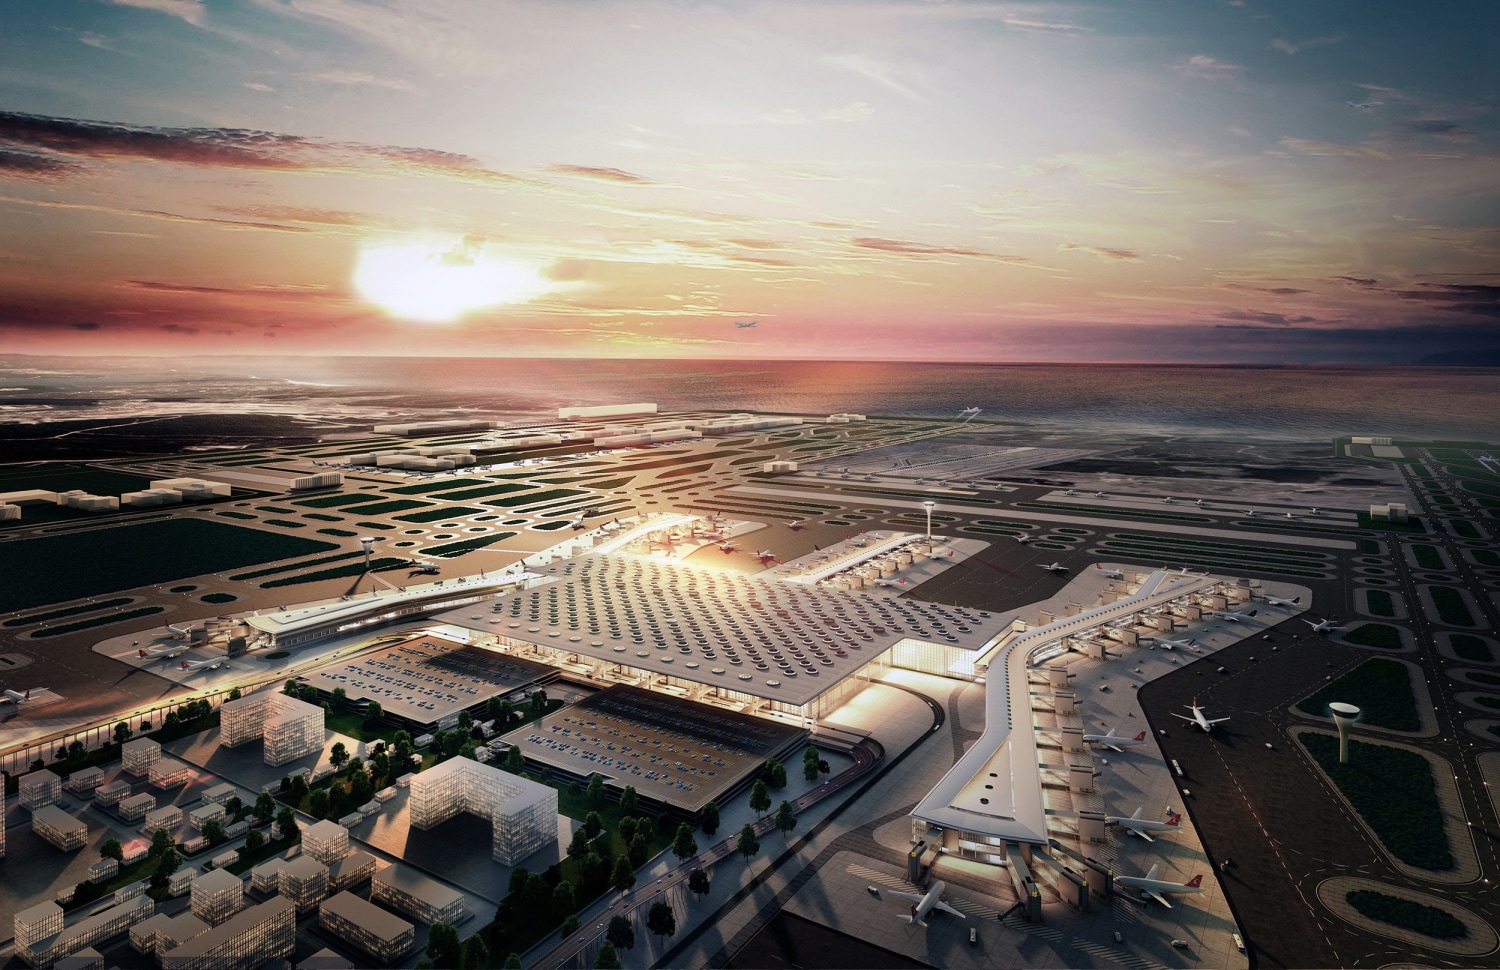 Photos of Istanbul's Huge New Airport Offer a Look at Modern Turkey